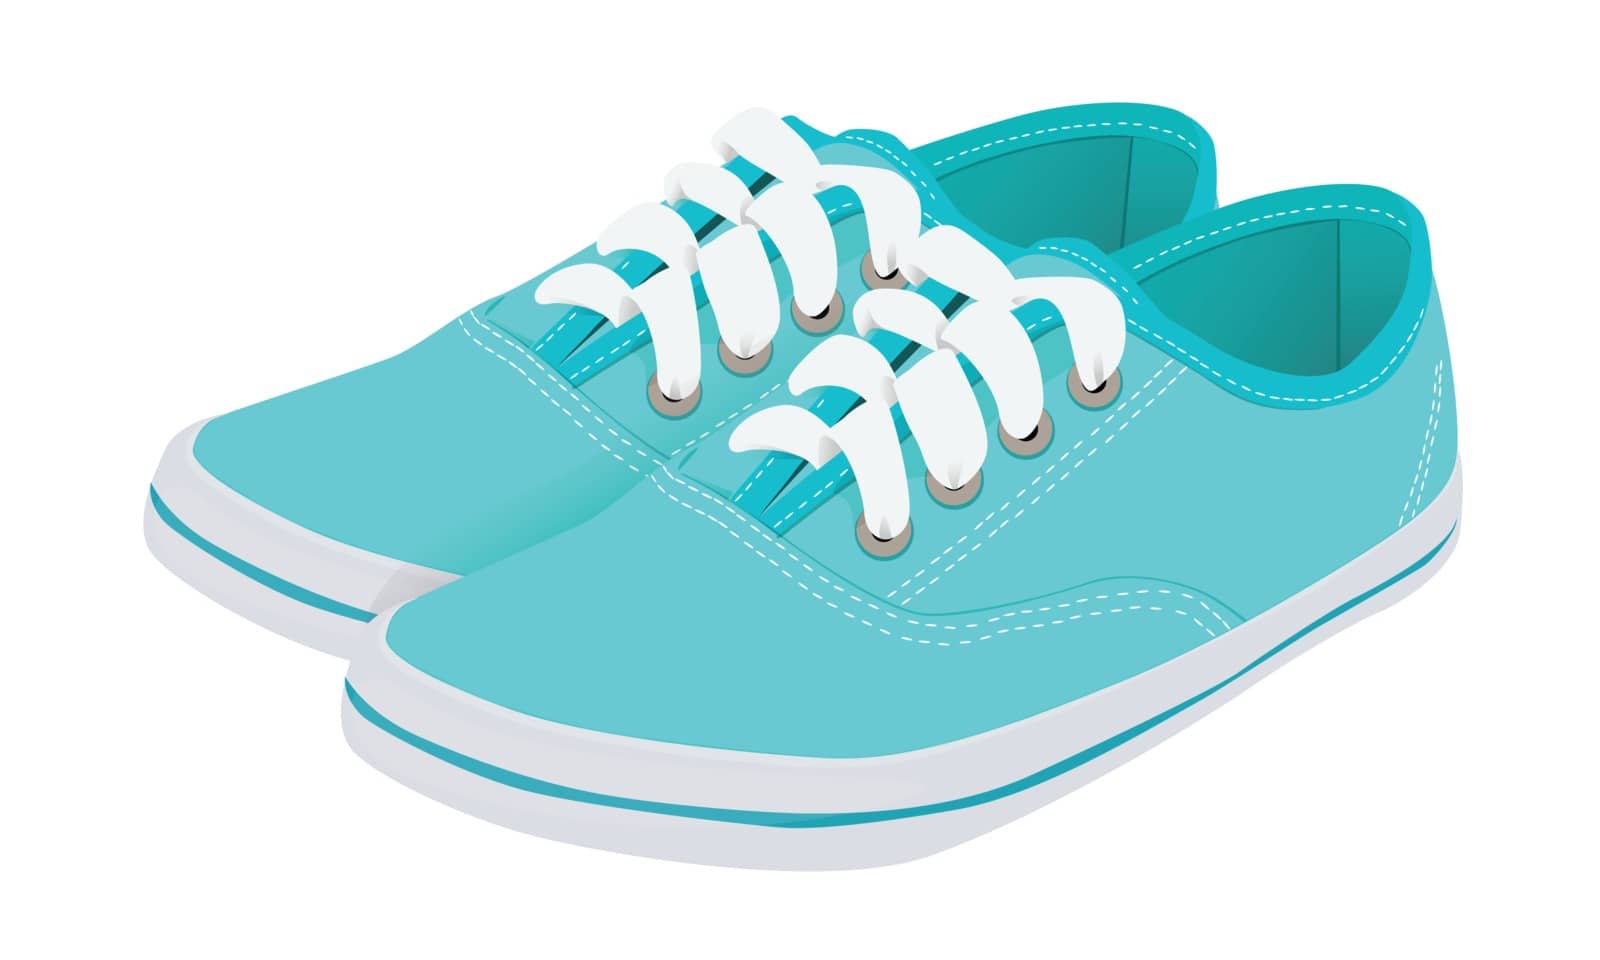 Blue running shoes with laces on a white rubber sole